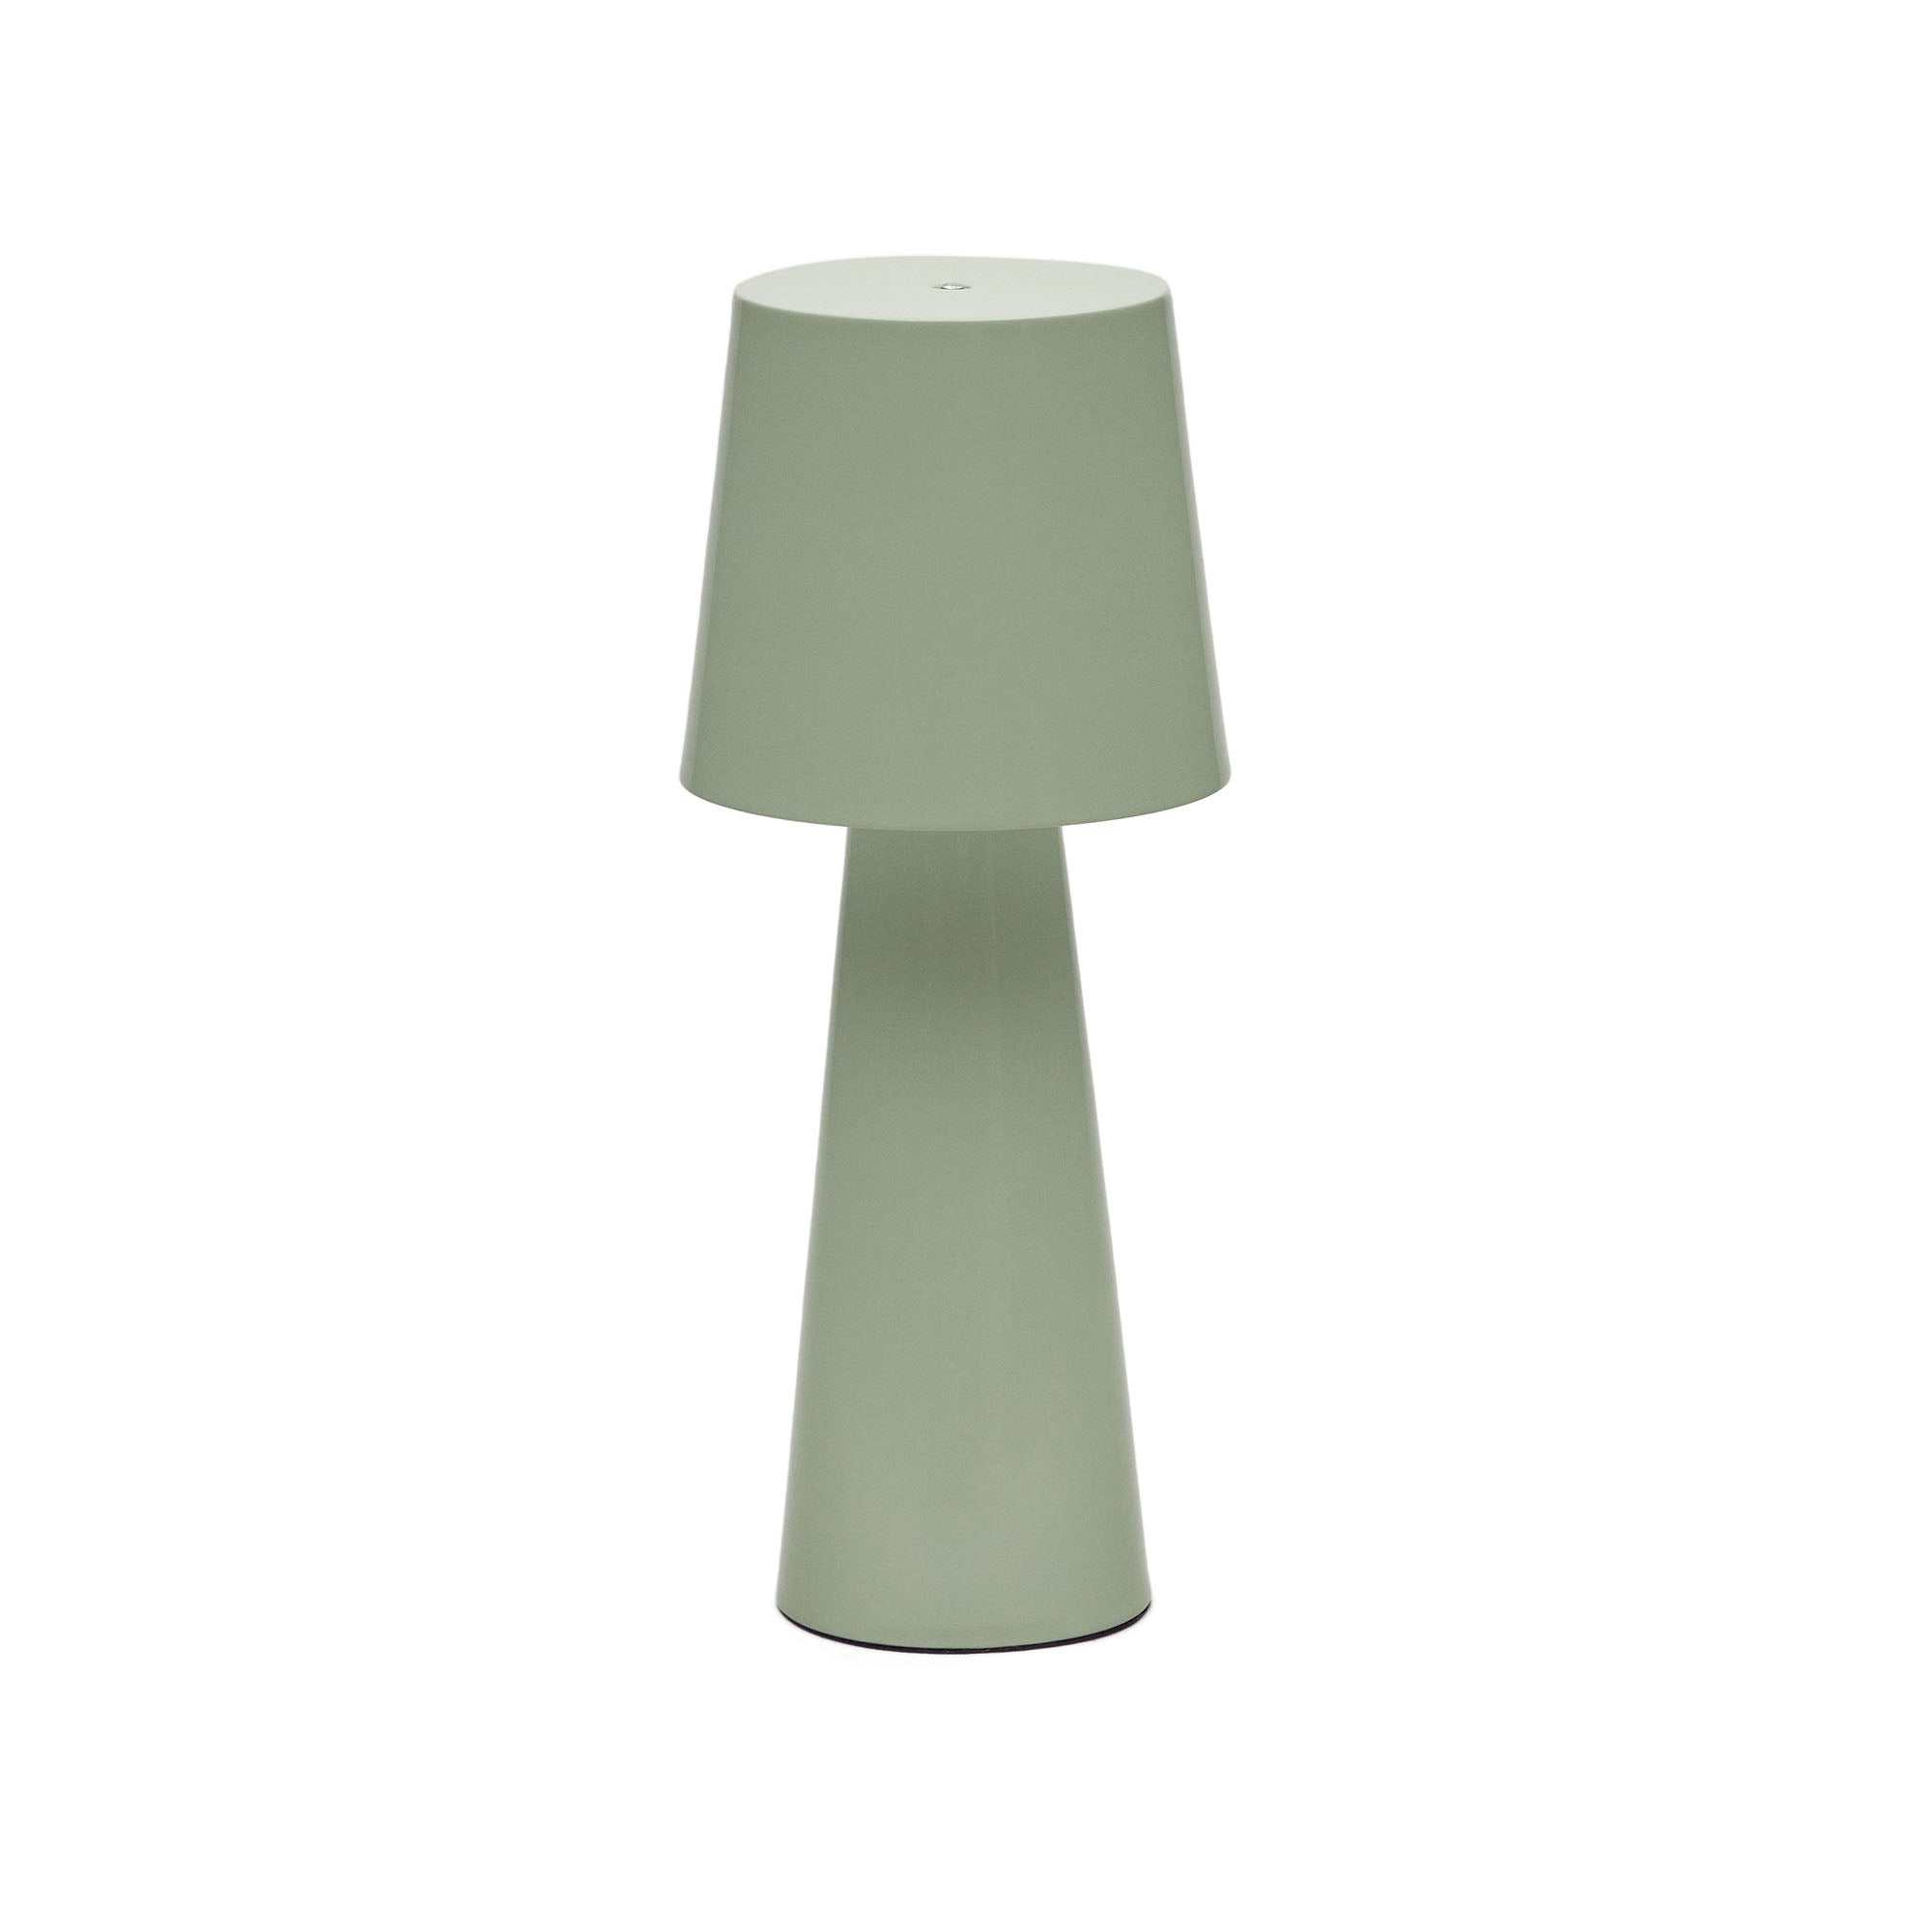 Arenys large table lamp with a turquoise painted finish